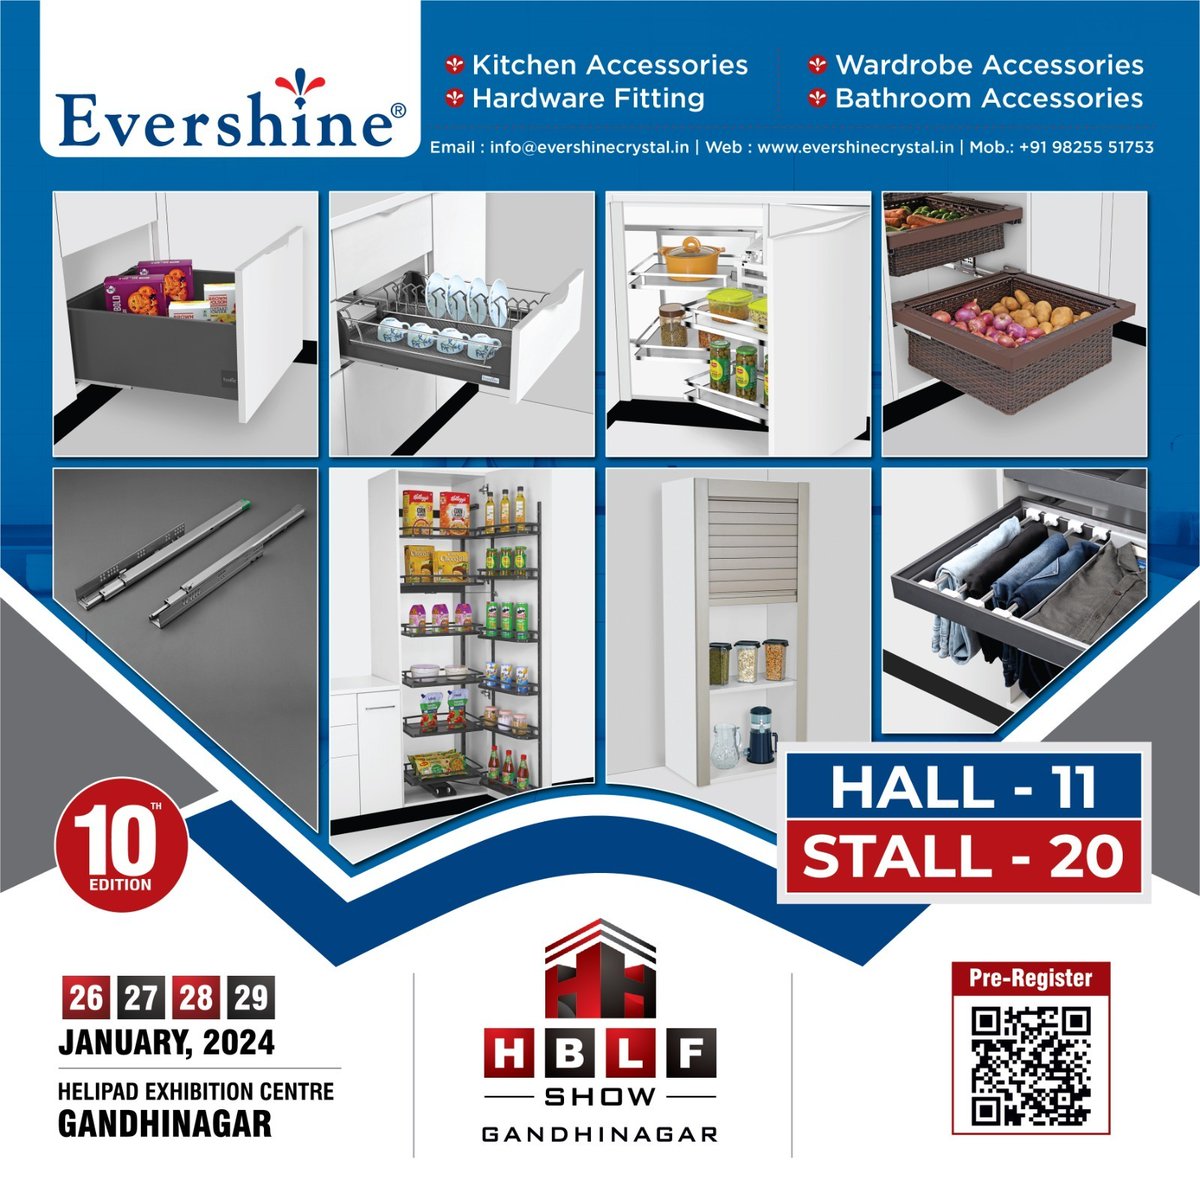 Visit #EVERSHINE's stall at the #HBLFShow2024 & witness the world of #kitchenstoragesolutions.
#InnovativeKitchenSolution #EvershineSurat #KitchenSolutions #HBLFShow #UpComingExhibition #GandhinagarExhibition #HBLFShow2024 #January2024Exhibition #ExhibitionCentre #Gandhinagar